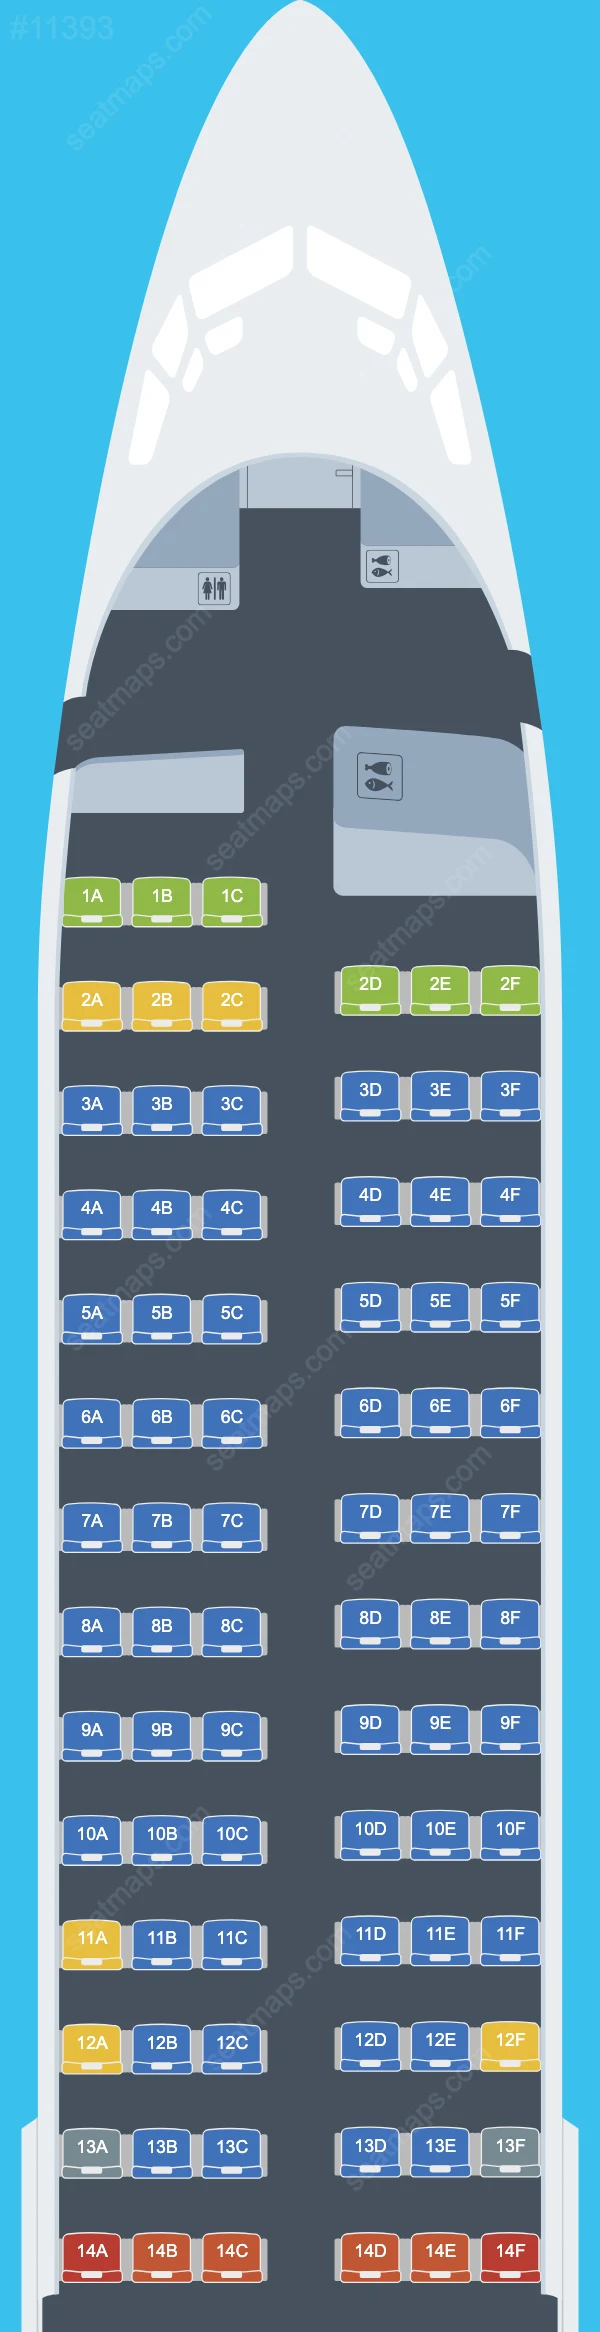 Hello Jets Boeing 737-800 aircraft seat map  737-800